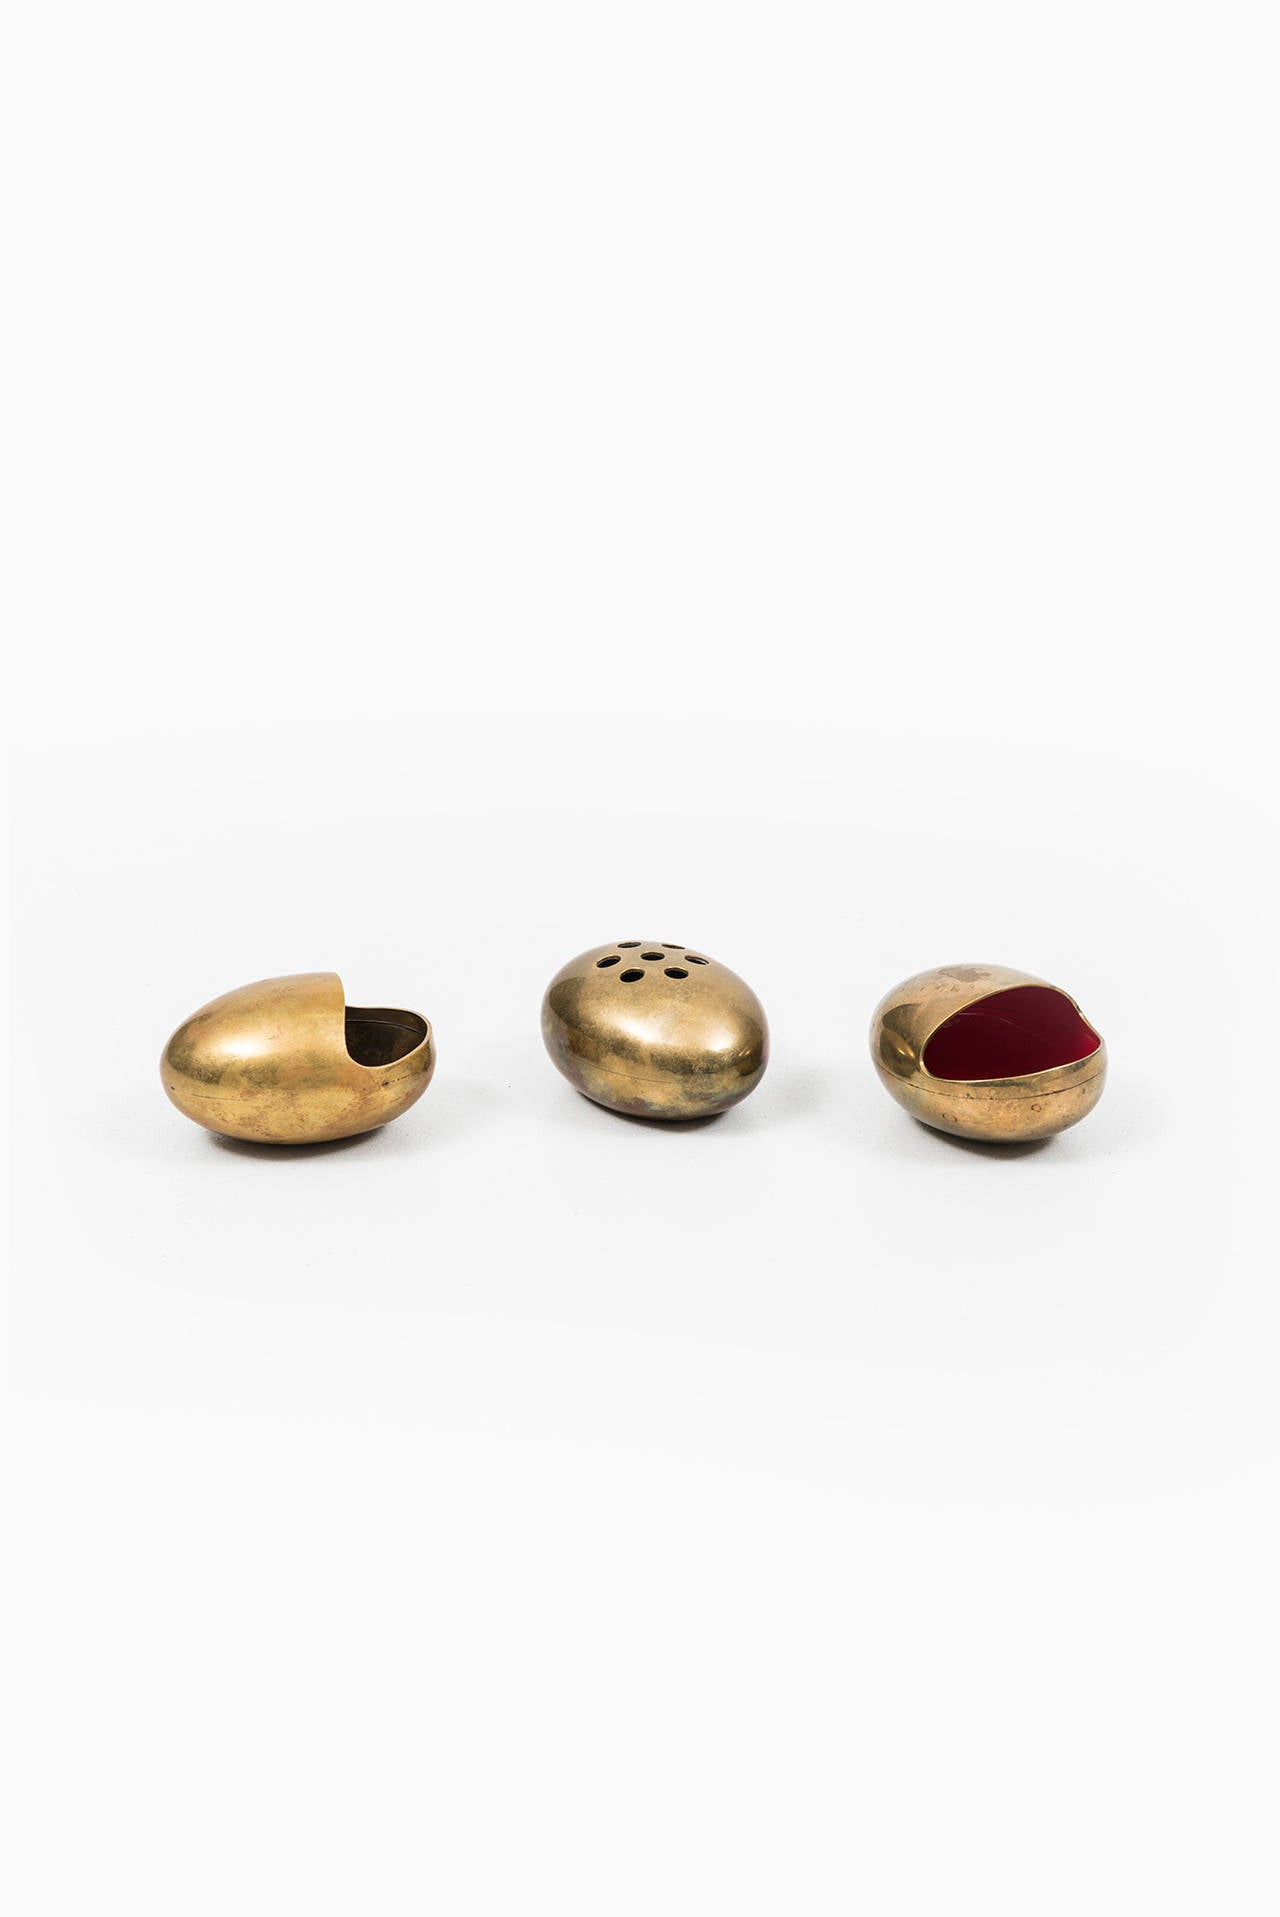 Danish Set of Two Ashtrays and Cigarette Holder in Brass by Cohr in Denmark